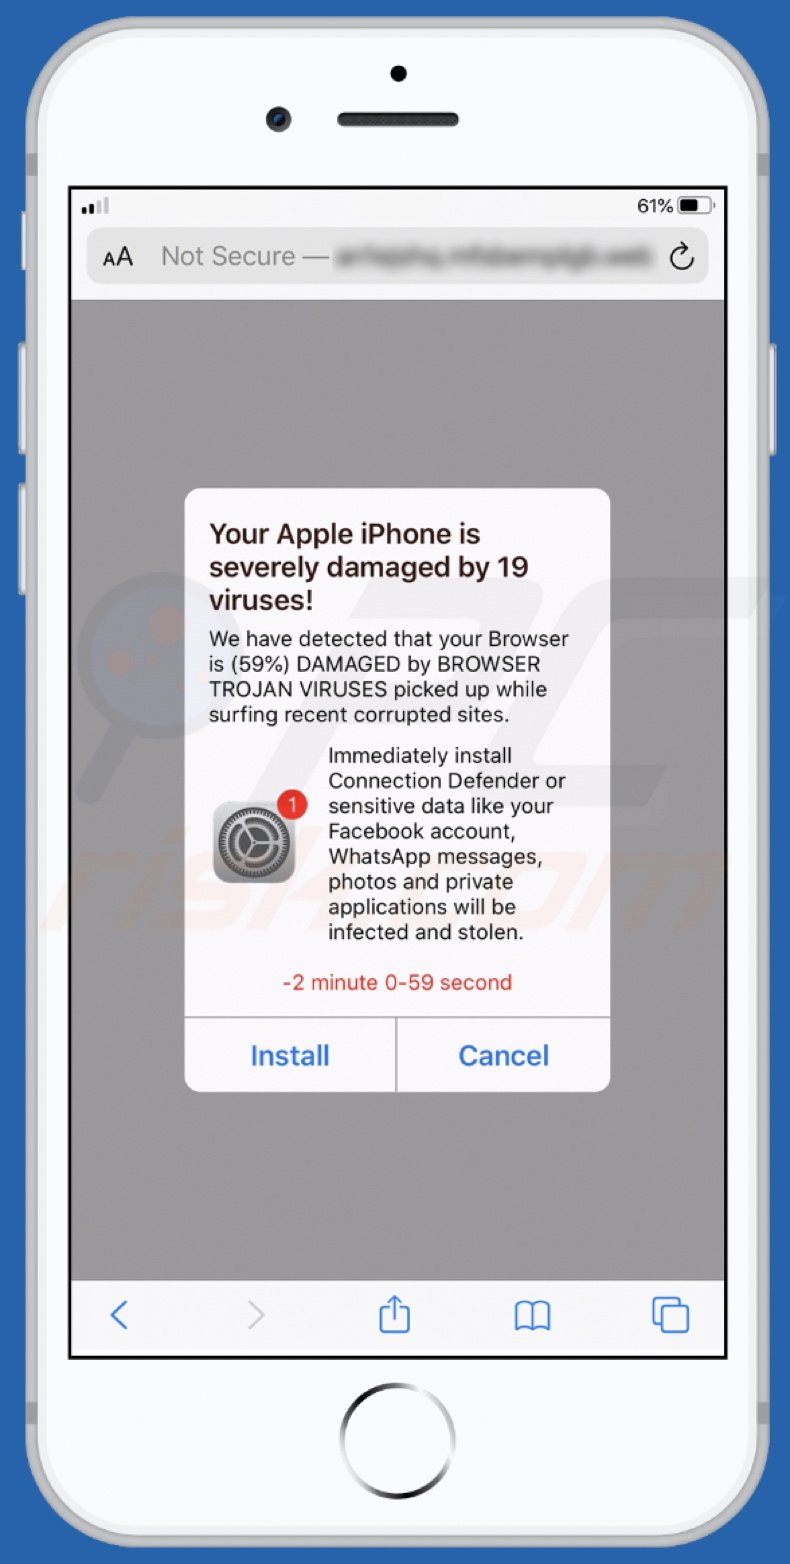 Your Apple iPhone is severely damaged by 19 viruses! scam